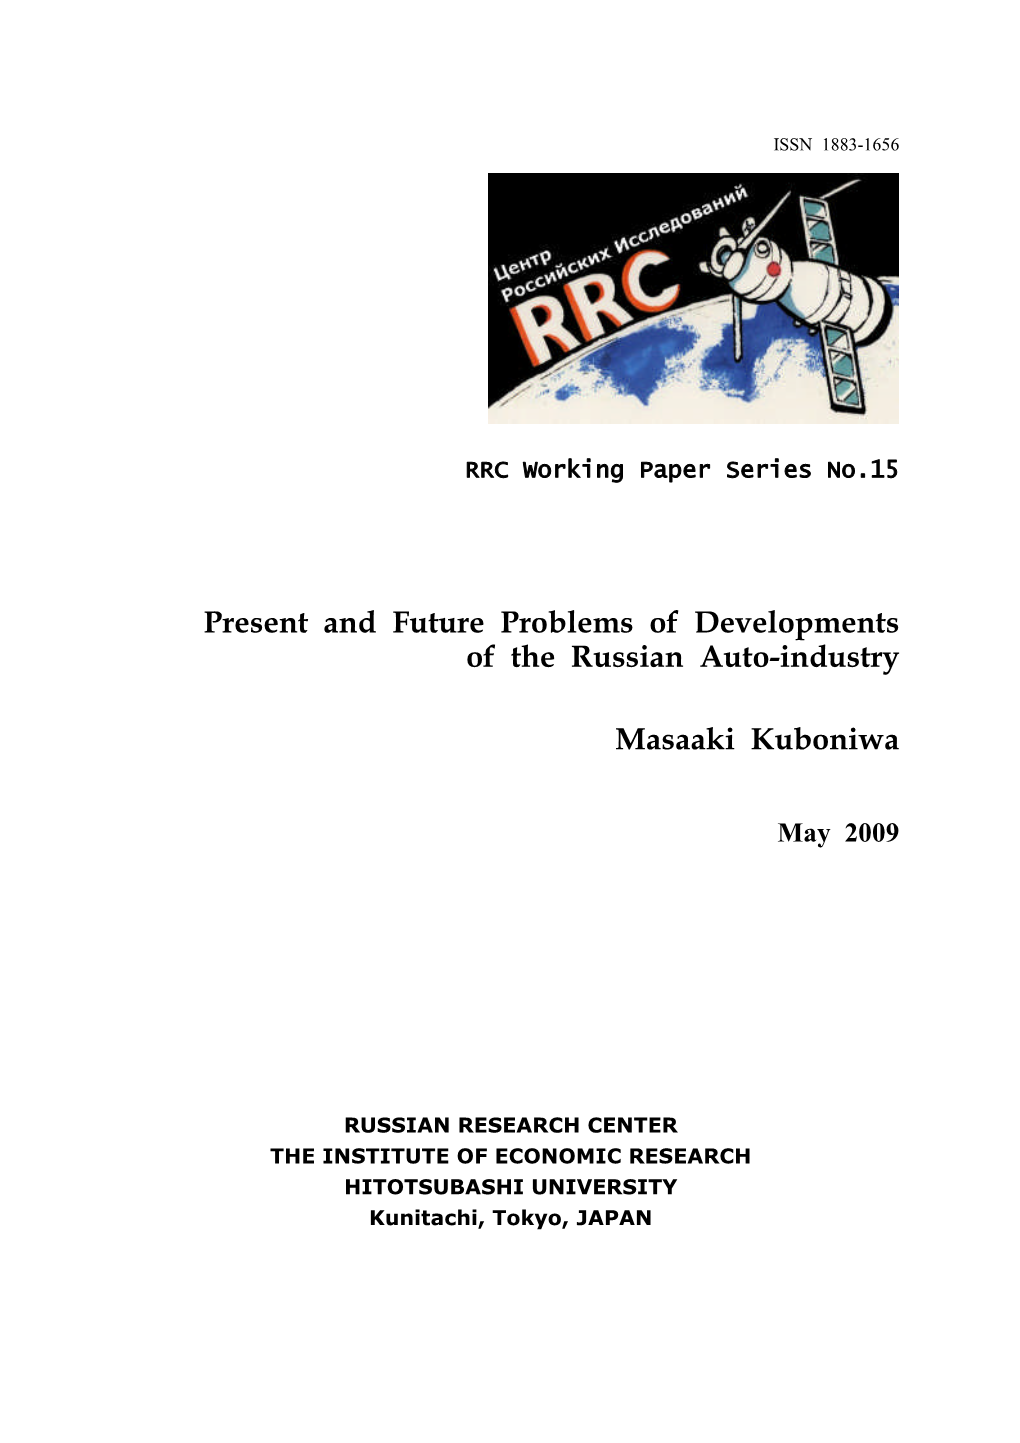 Present and Future Problems of Developments of the Russian Auto-Industry